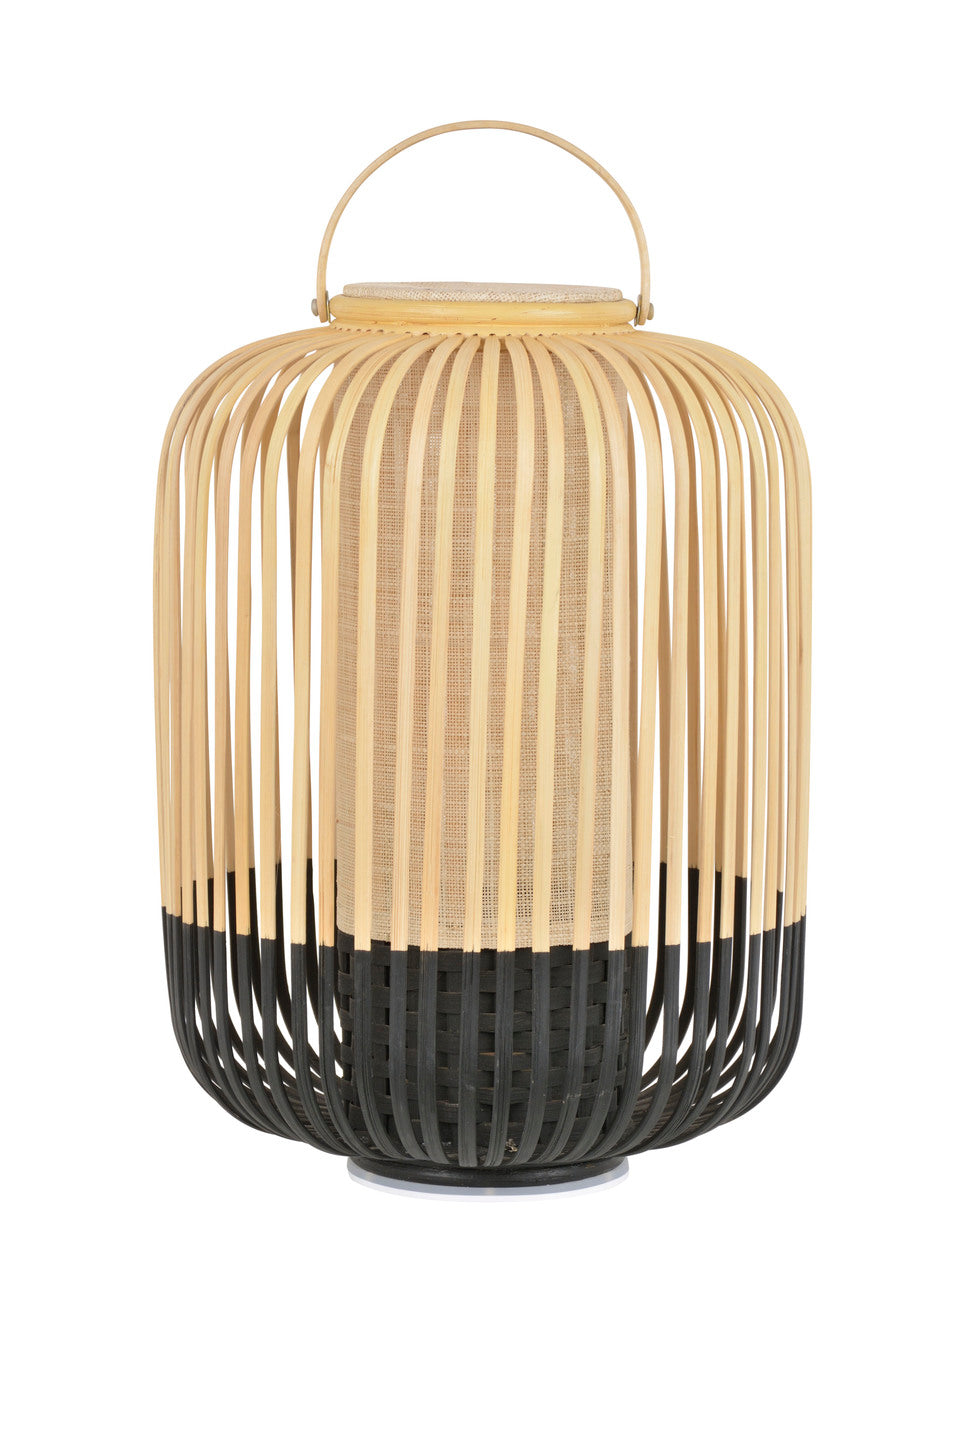 Take A Way Medium Lamp by Forestier